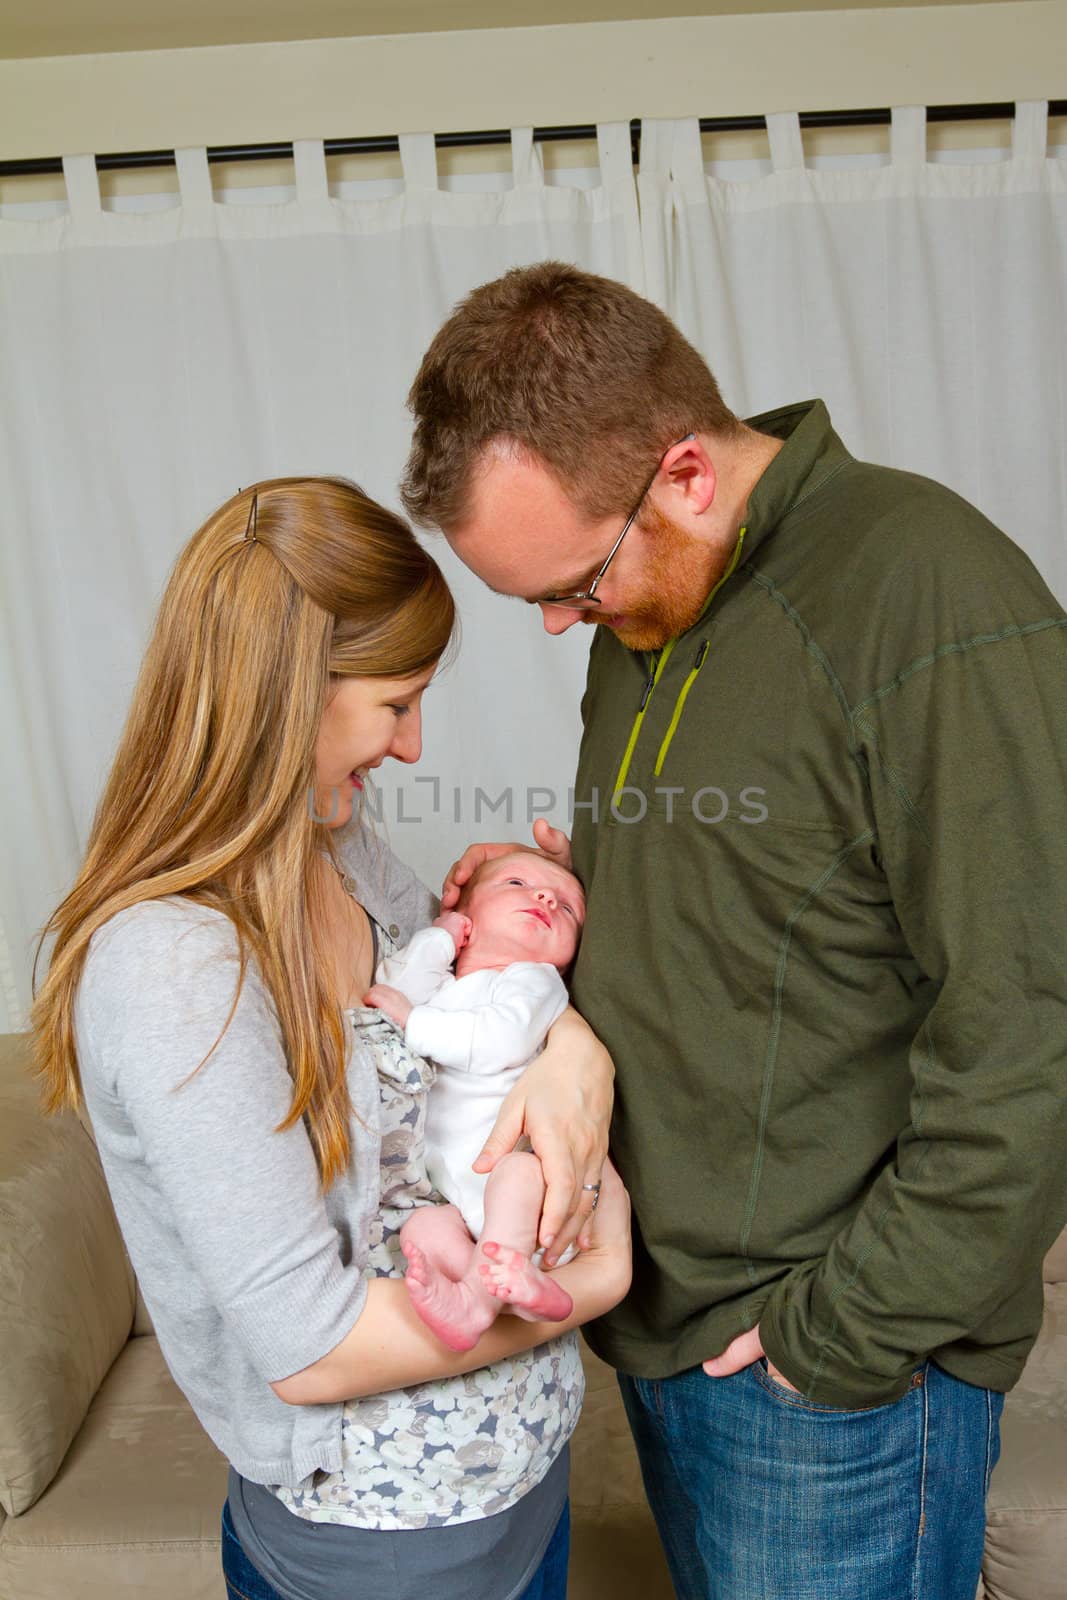 A mother and father hold their newborn baby son in their arms and look towards him showing happiness and caring emotions.